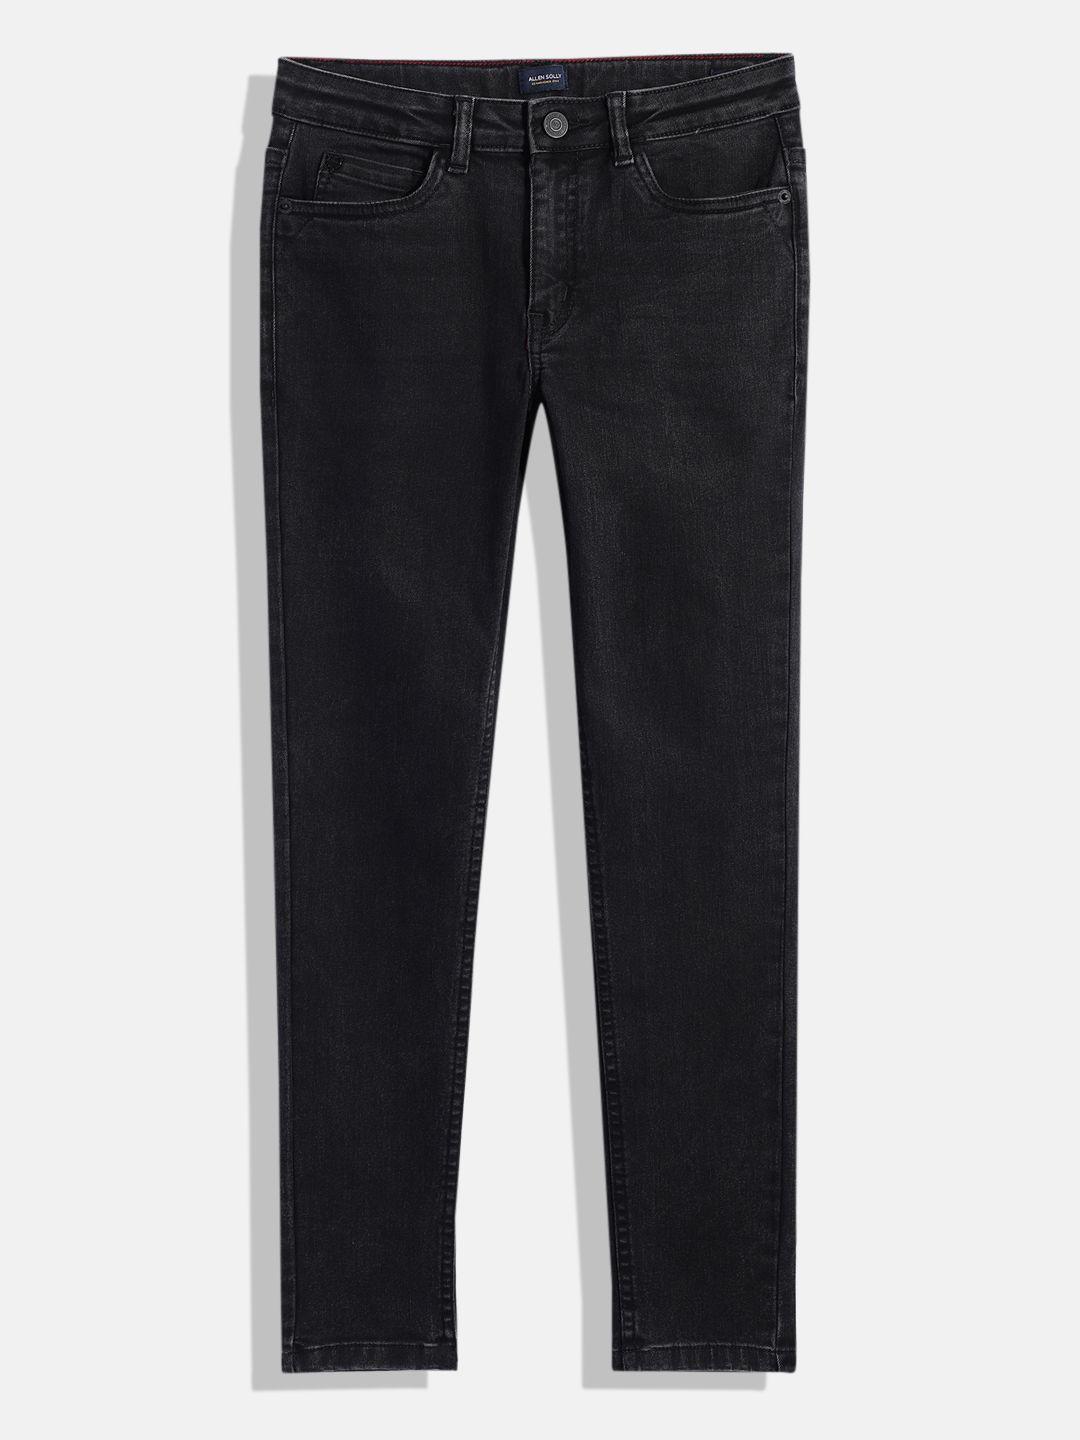 allen-solly-junior-boys-skinny-fit-clean-look-stretchable-jeans